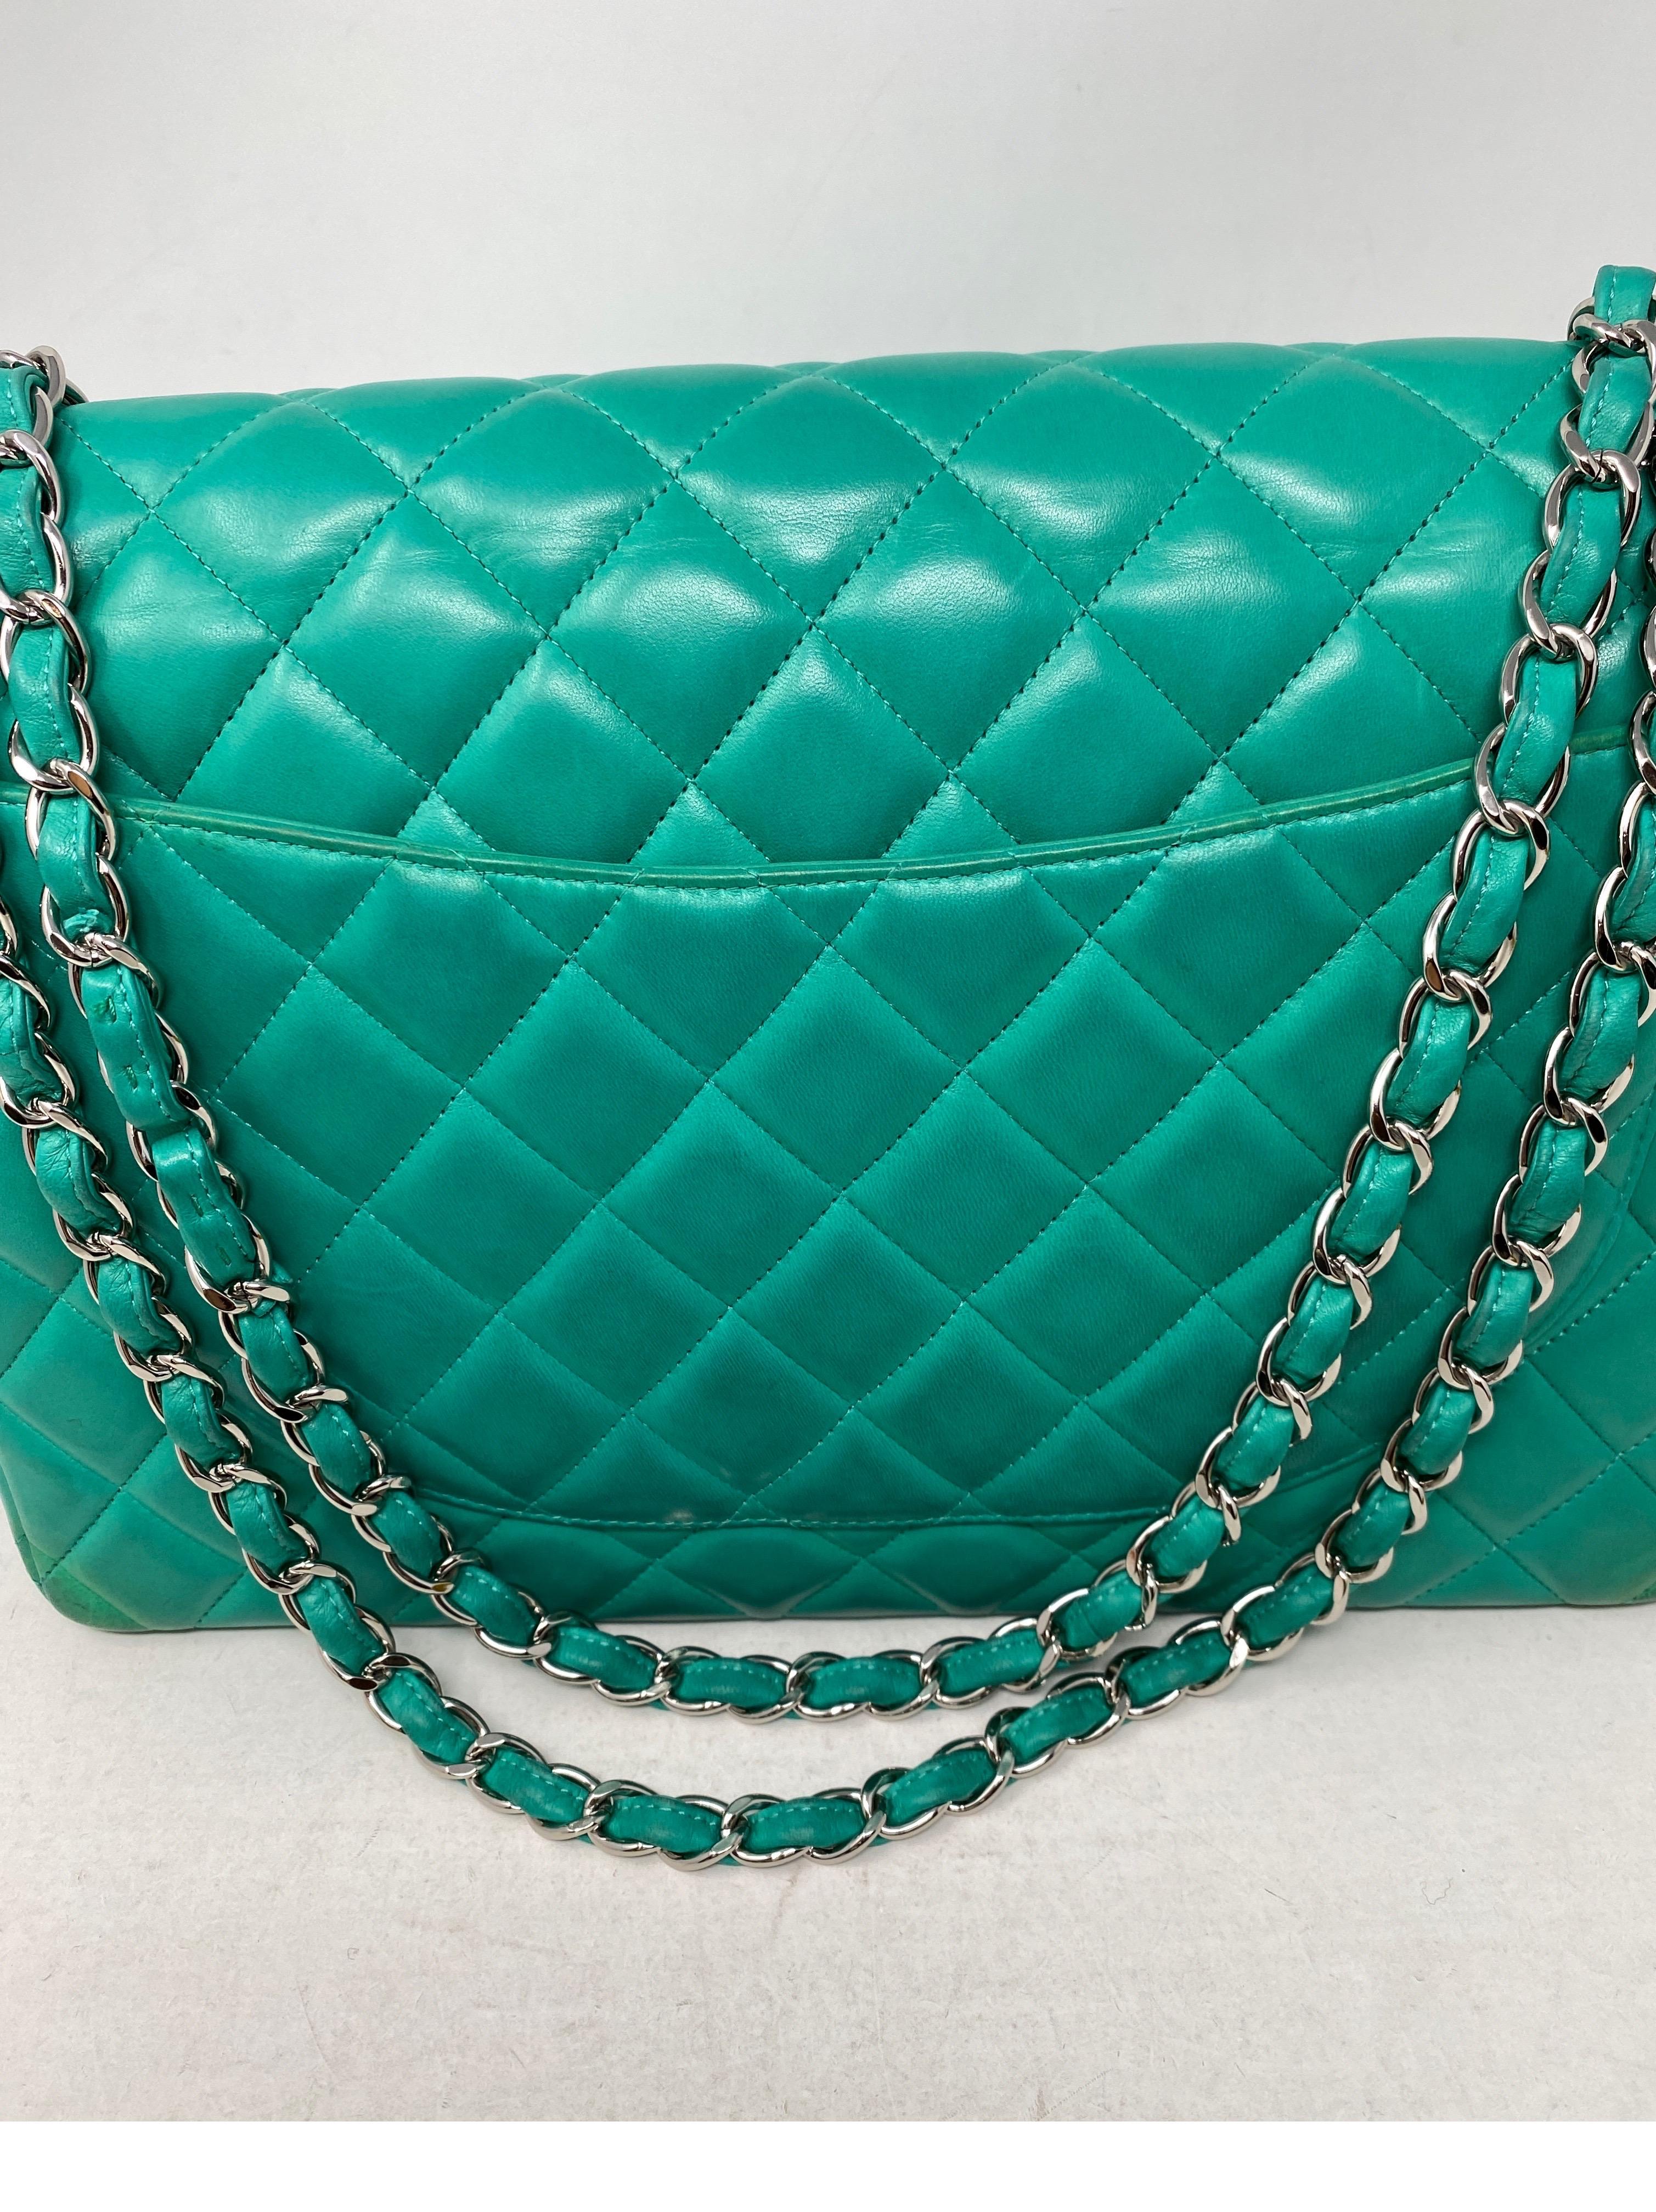 Chanel Teal Maxi Double Flap Bag 4